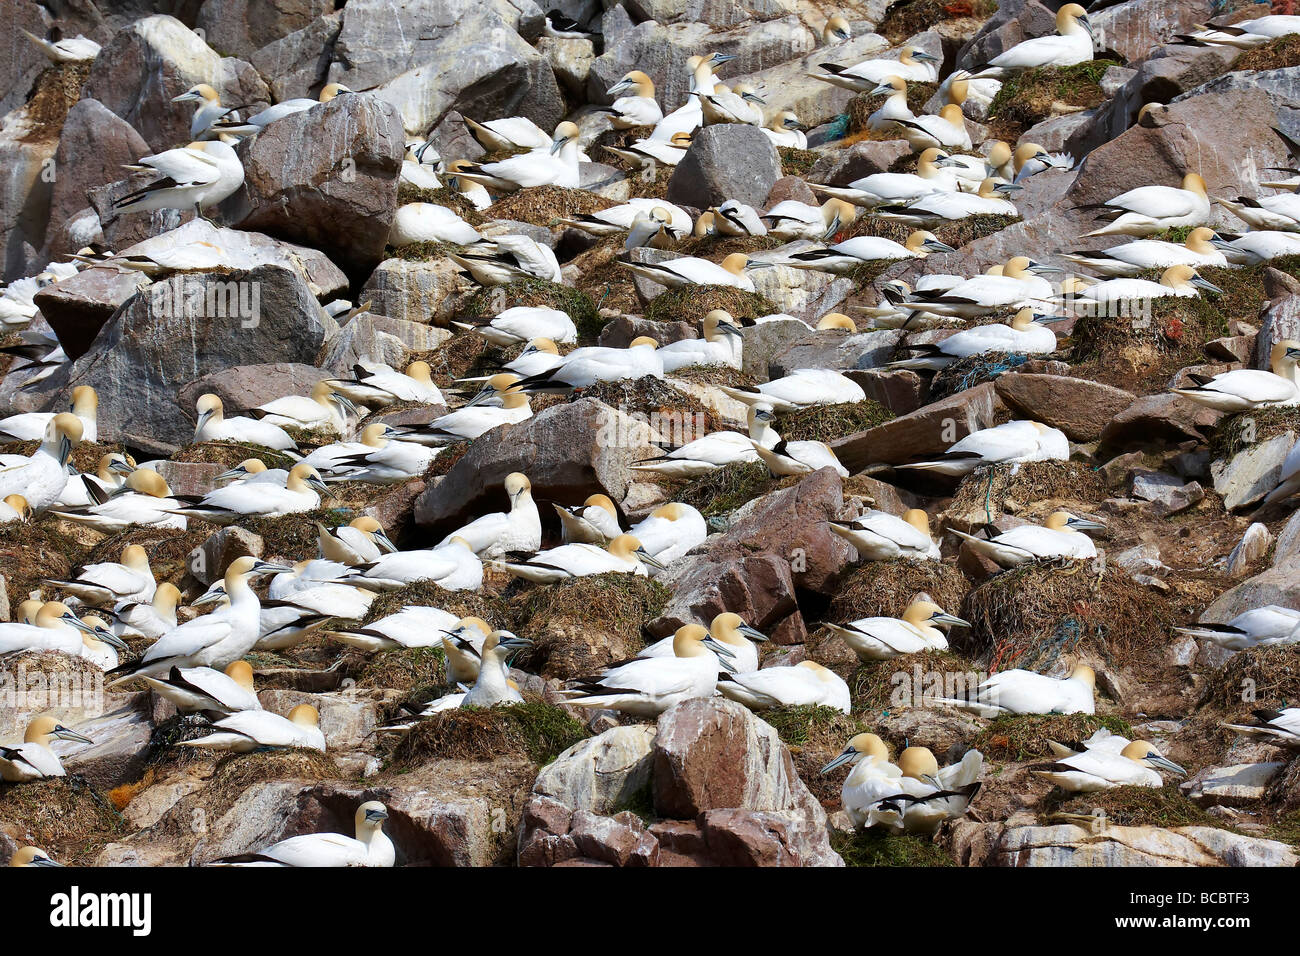 Gannets (Sulidae) sitting on nests Stock Photo